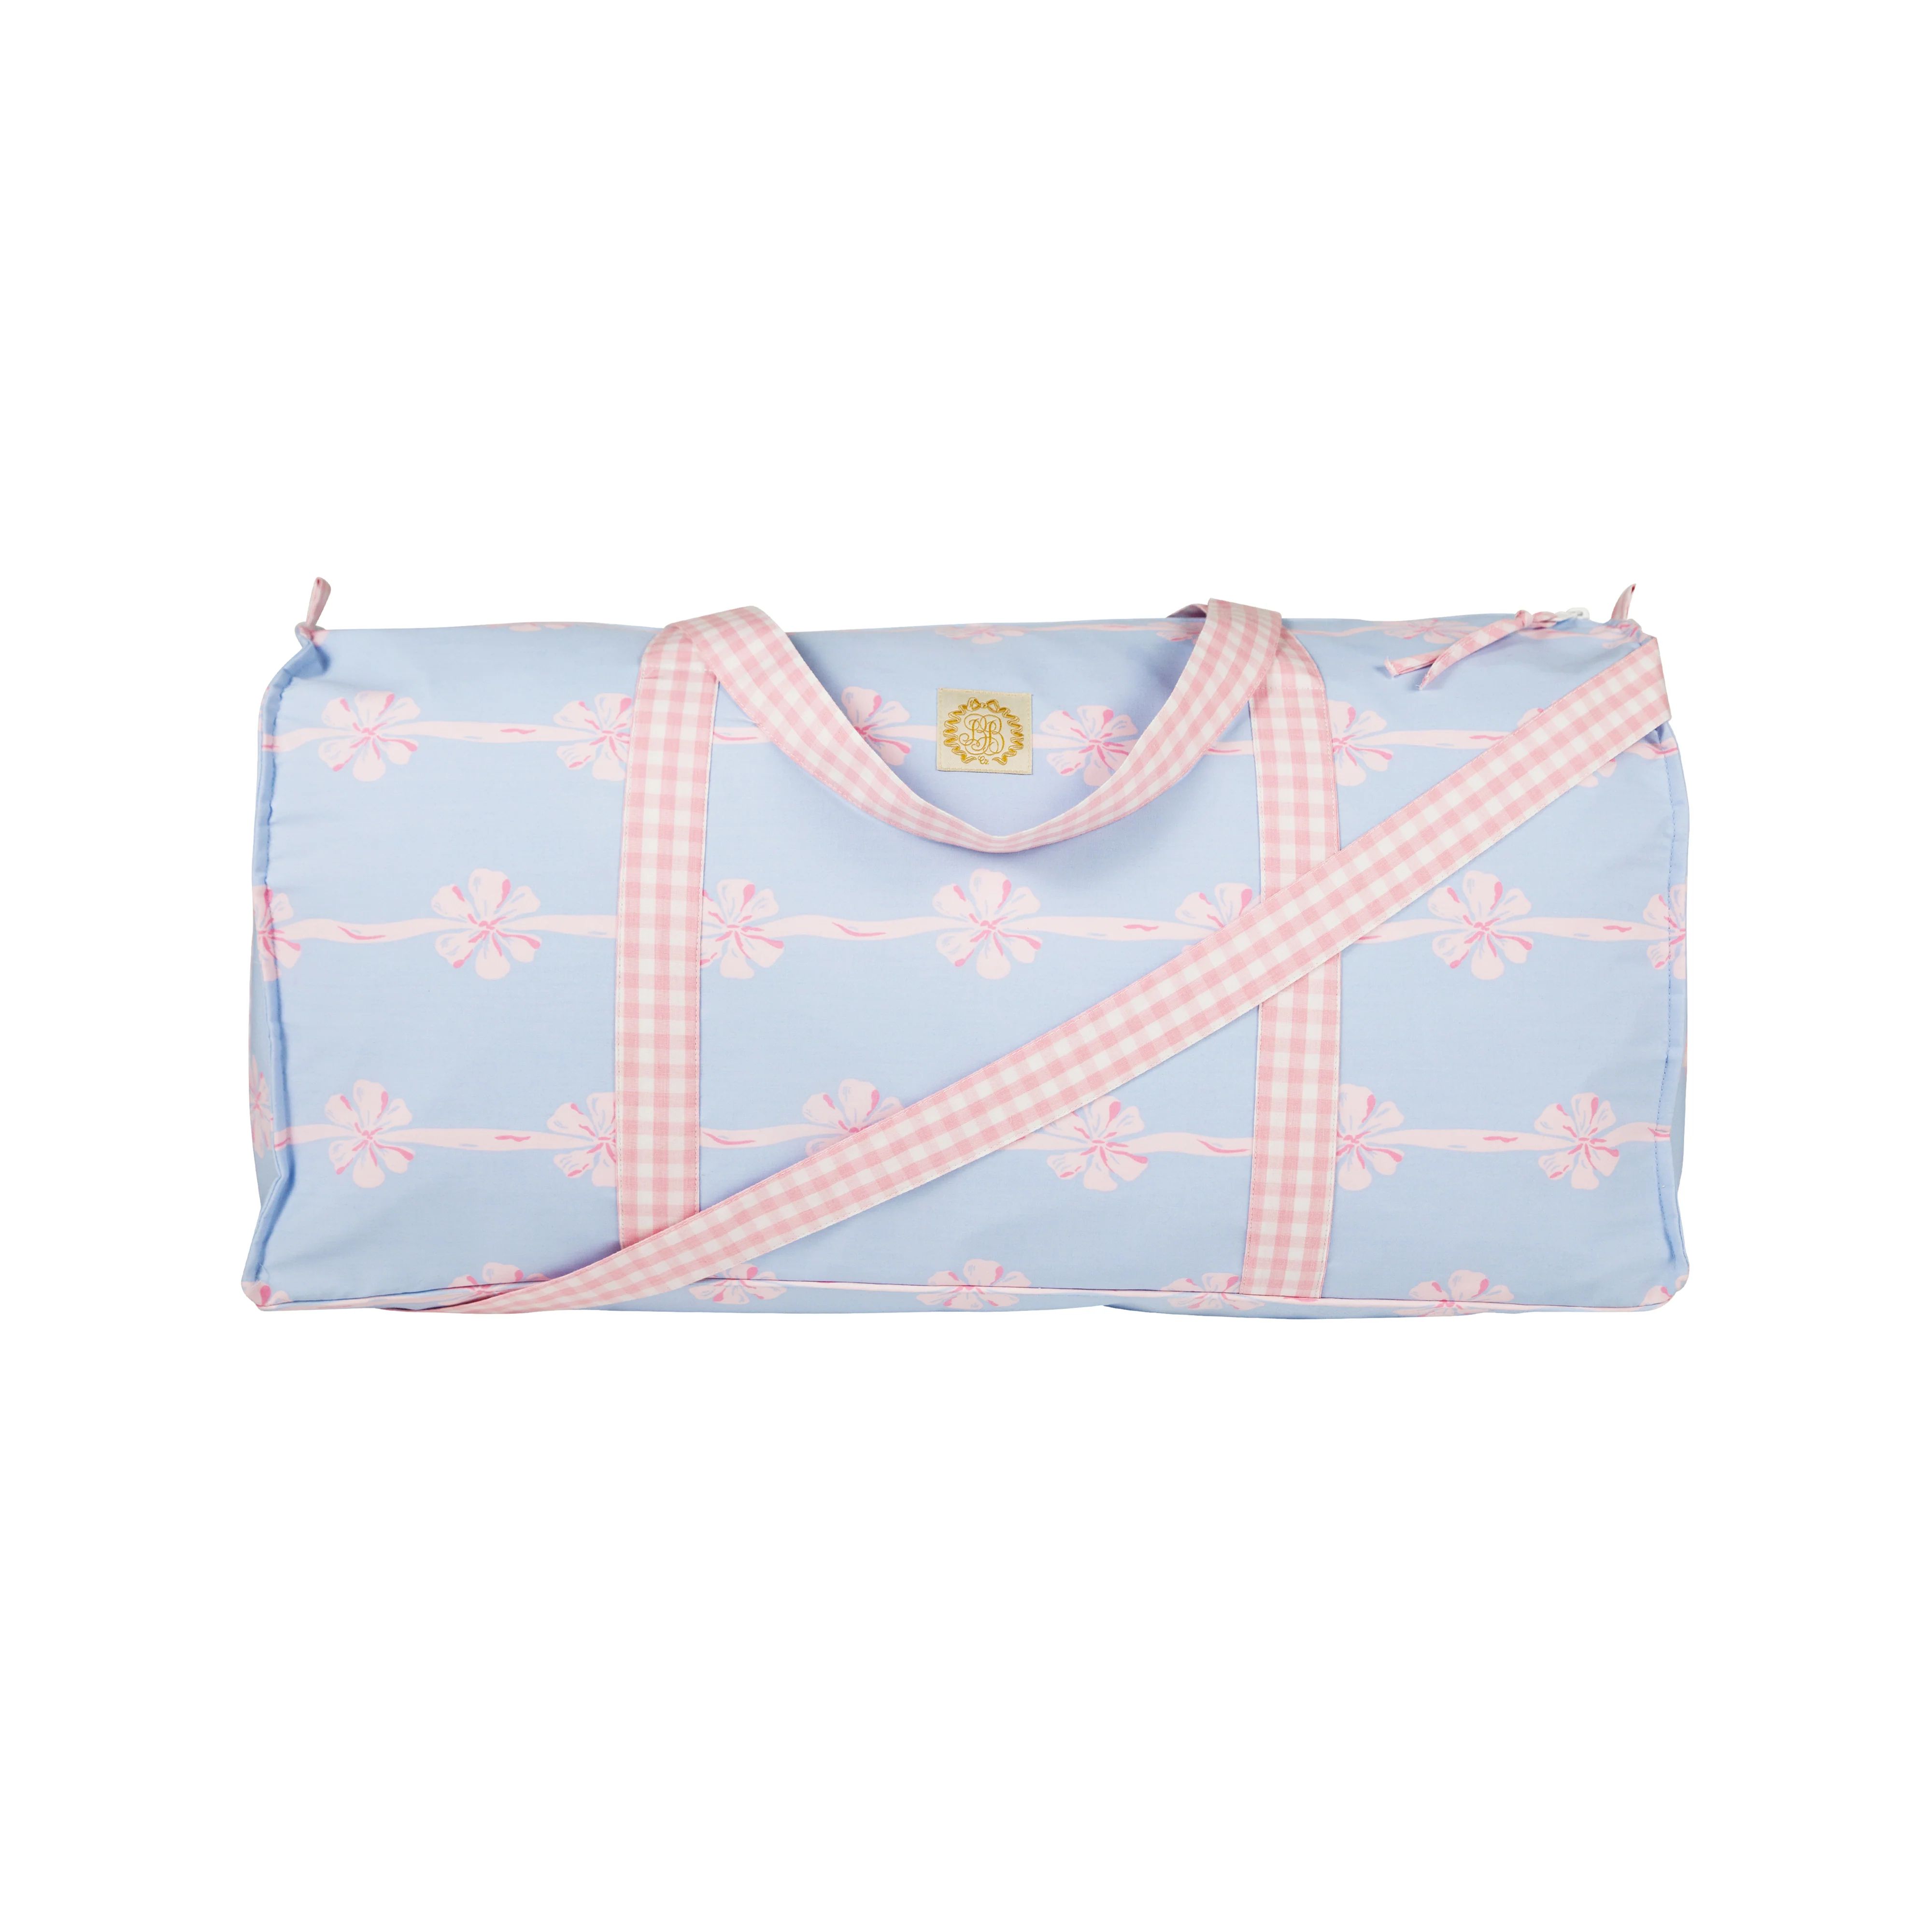 Logan's Long Weekend Bag - No Bow, No Go with Sandpearl Pink Gingham | The Beaufort Bonnet Company